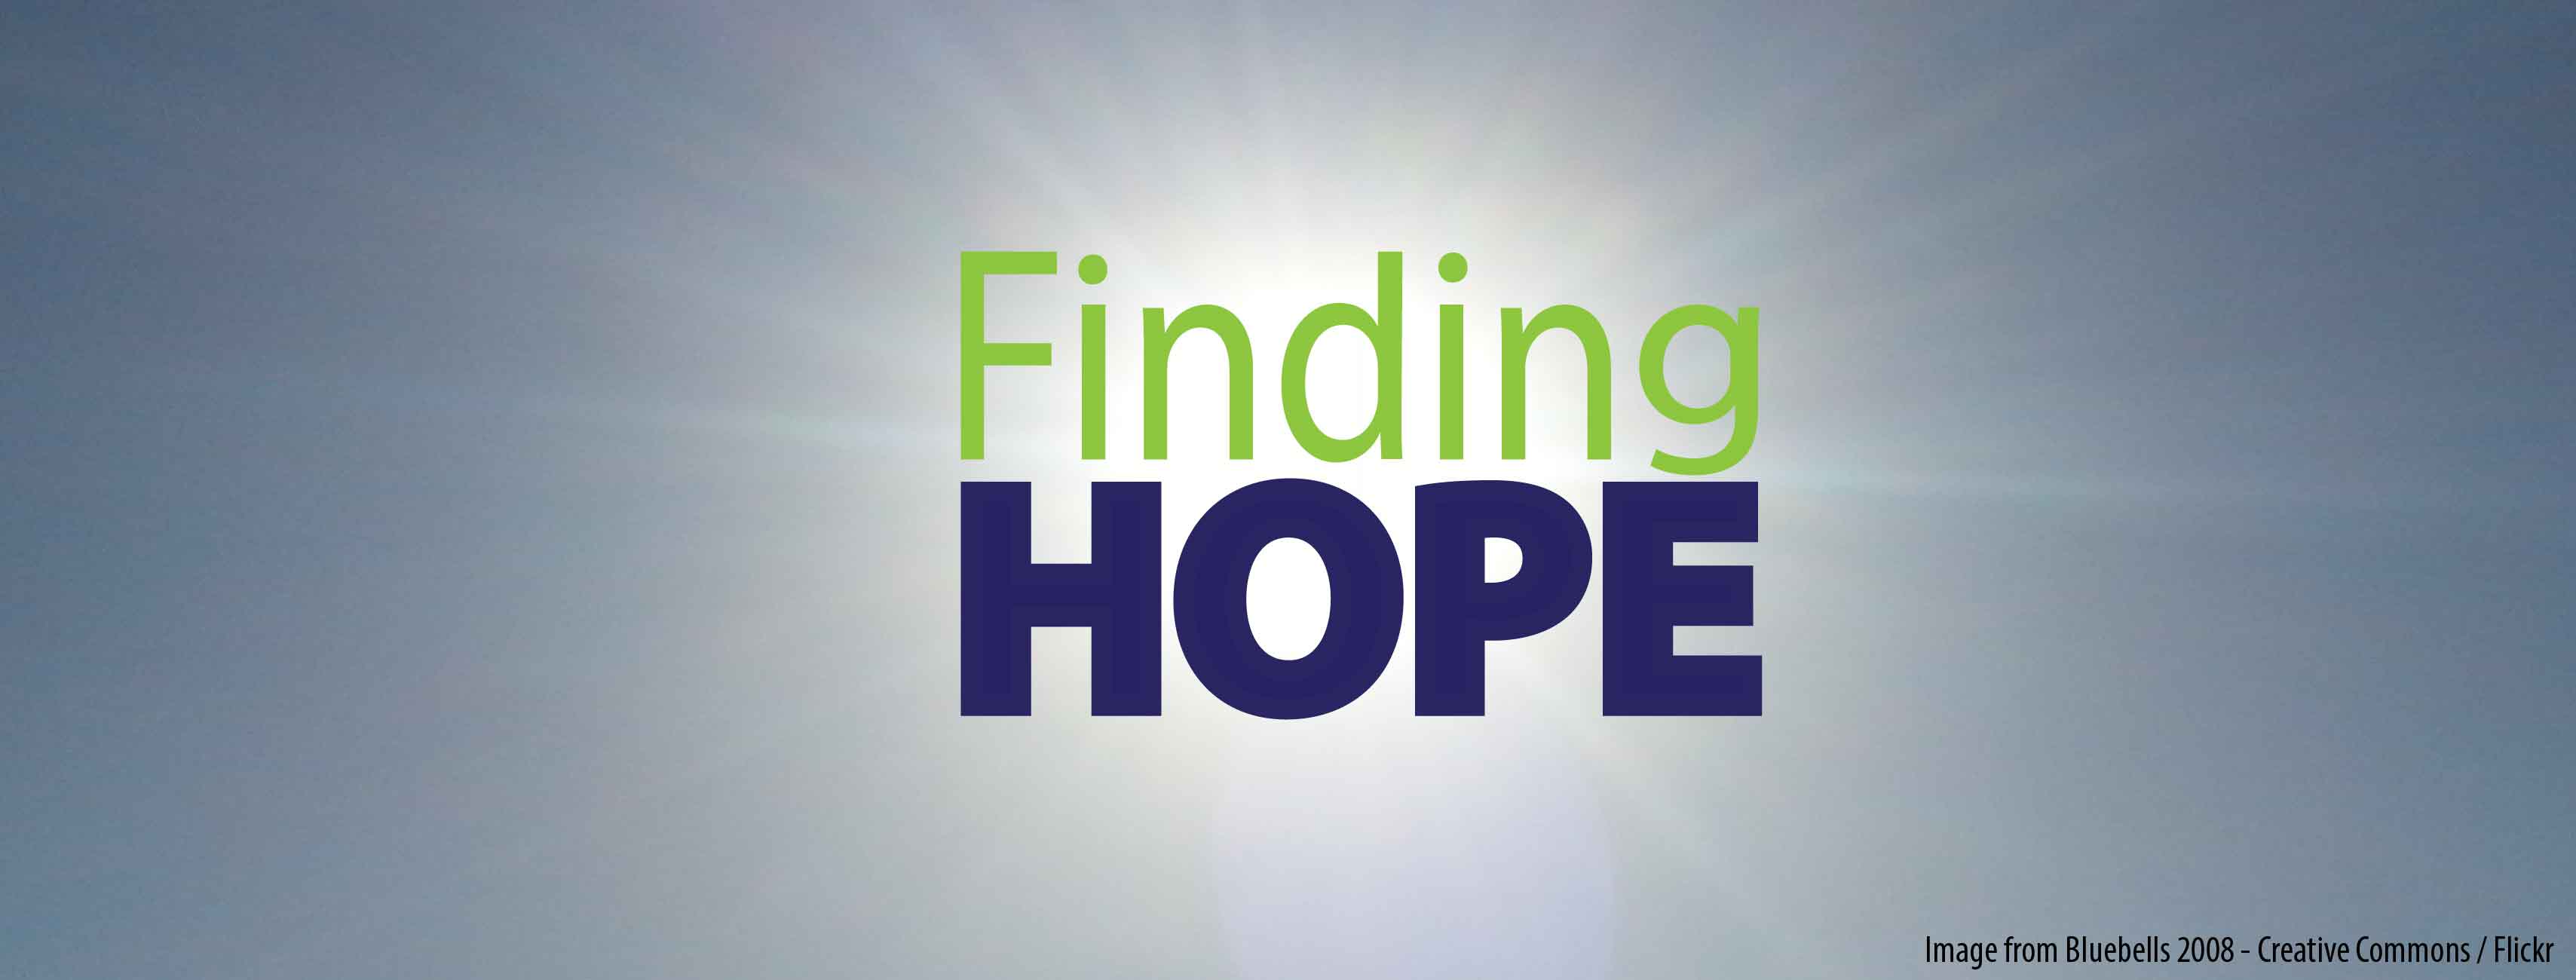 Finding Hope Facebook Cover Photo